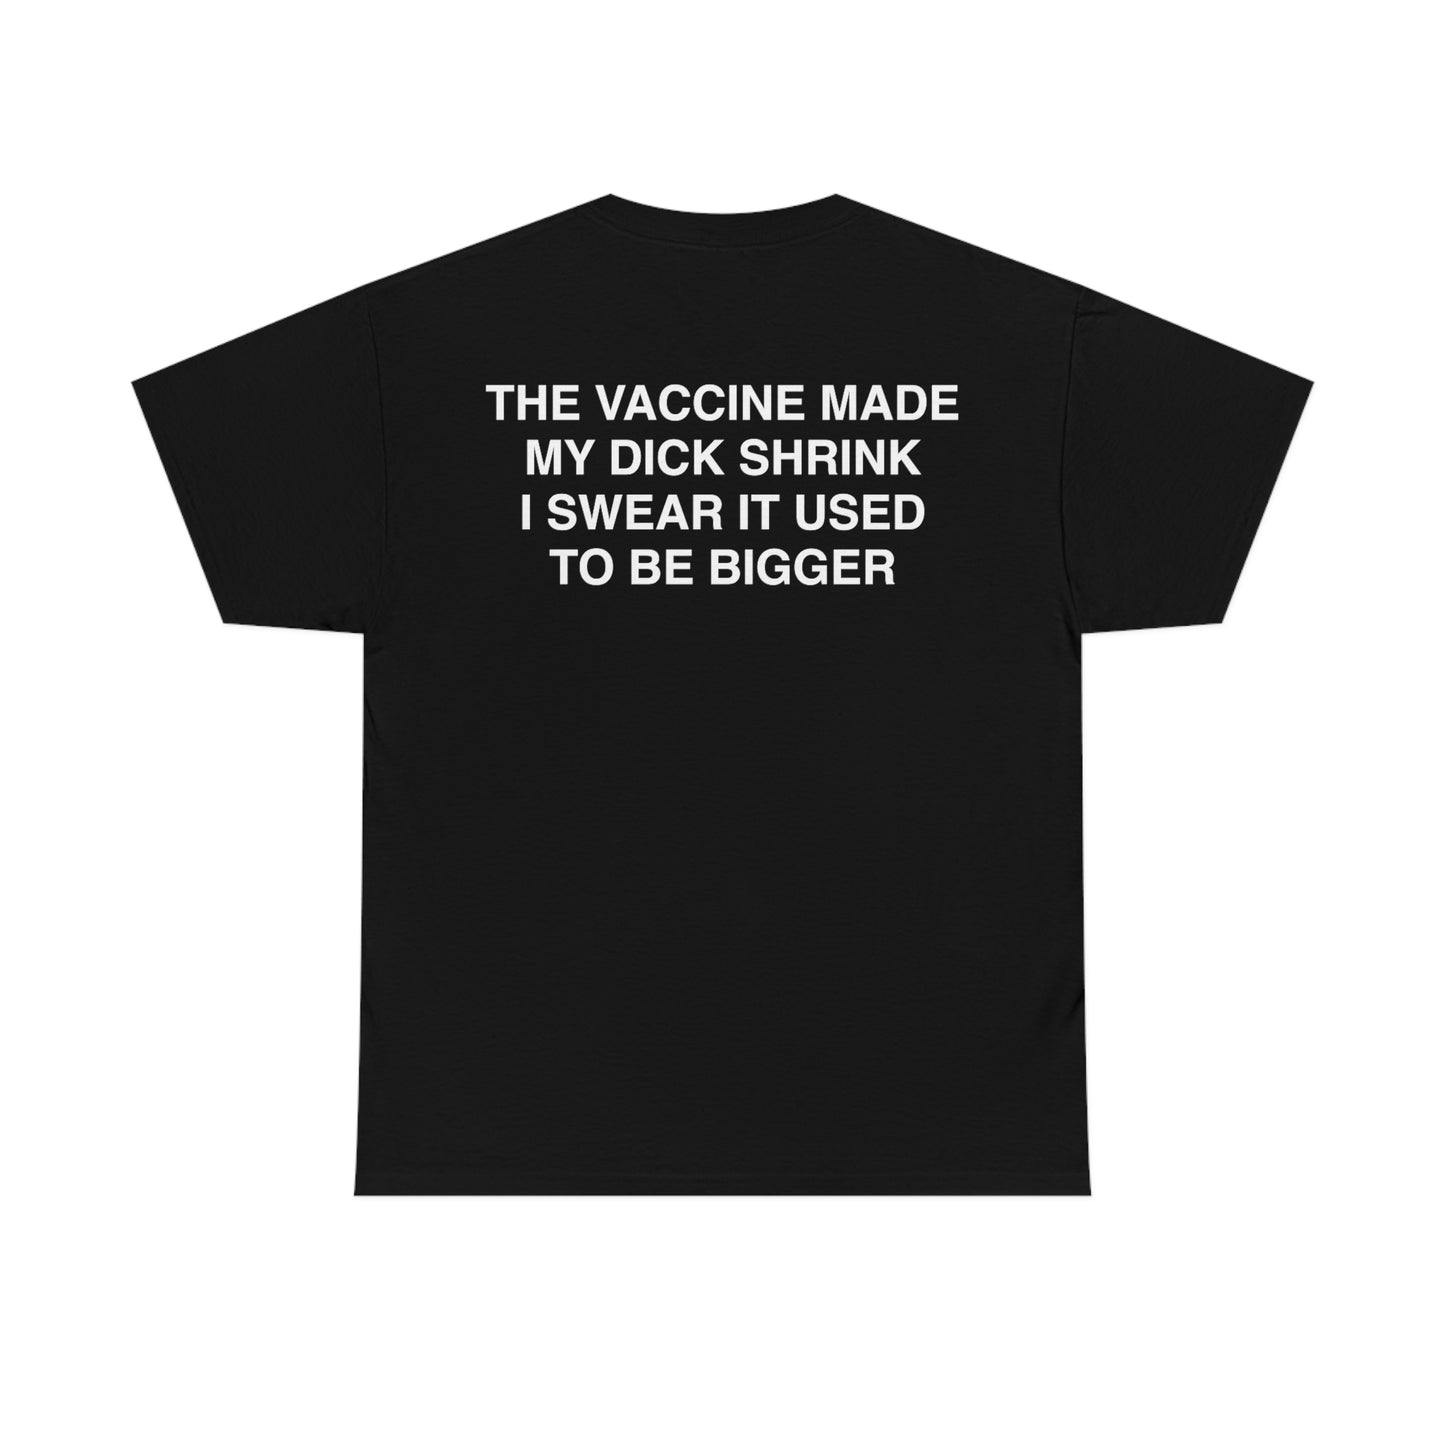 The Vaccine Made My Dick Shrink.